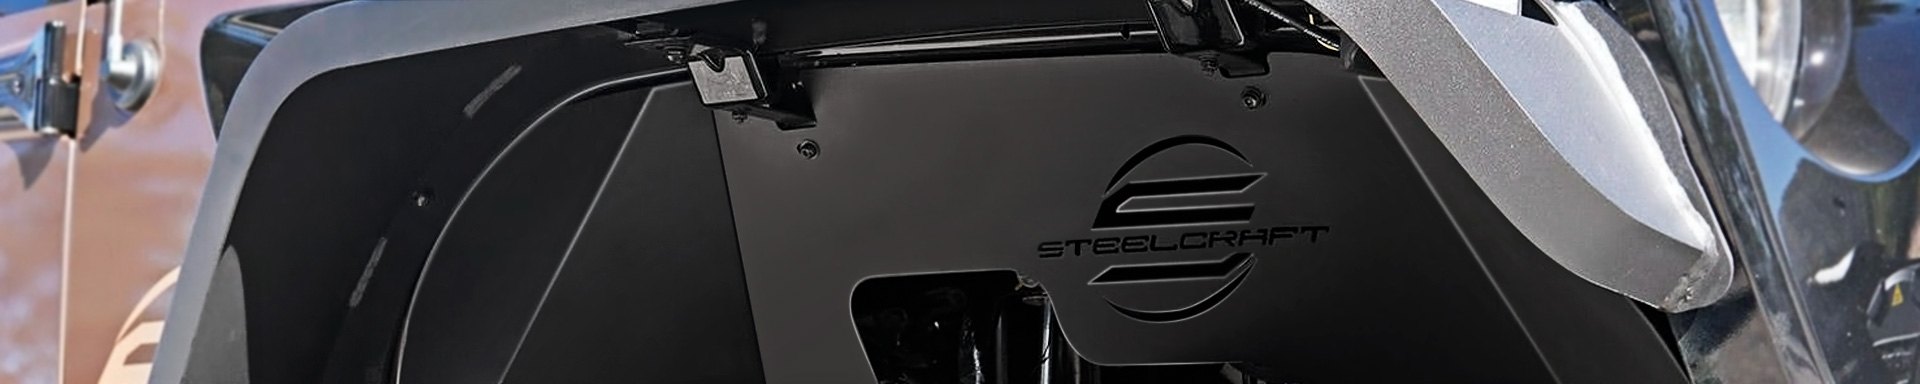 Meet the New Steelcraft Metal Fender Liners for Jeep Wrangler and Gladiator